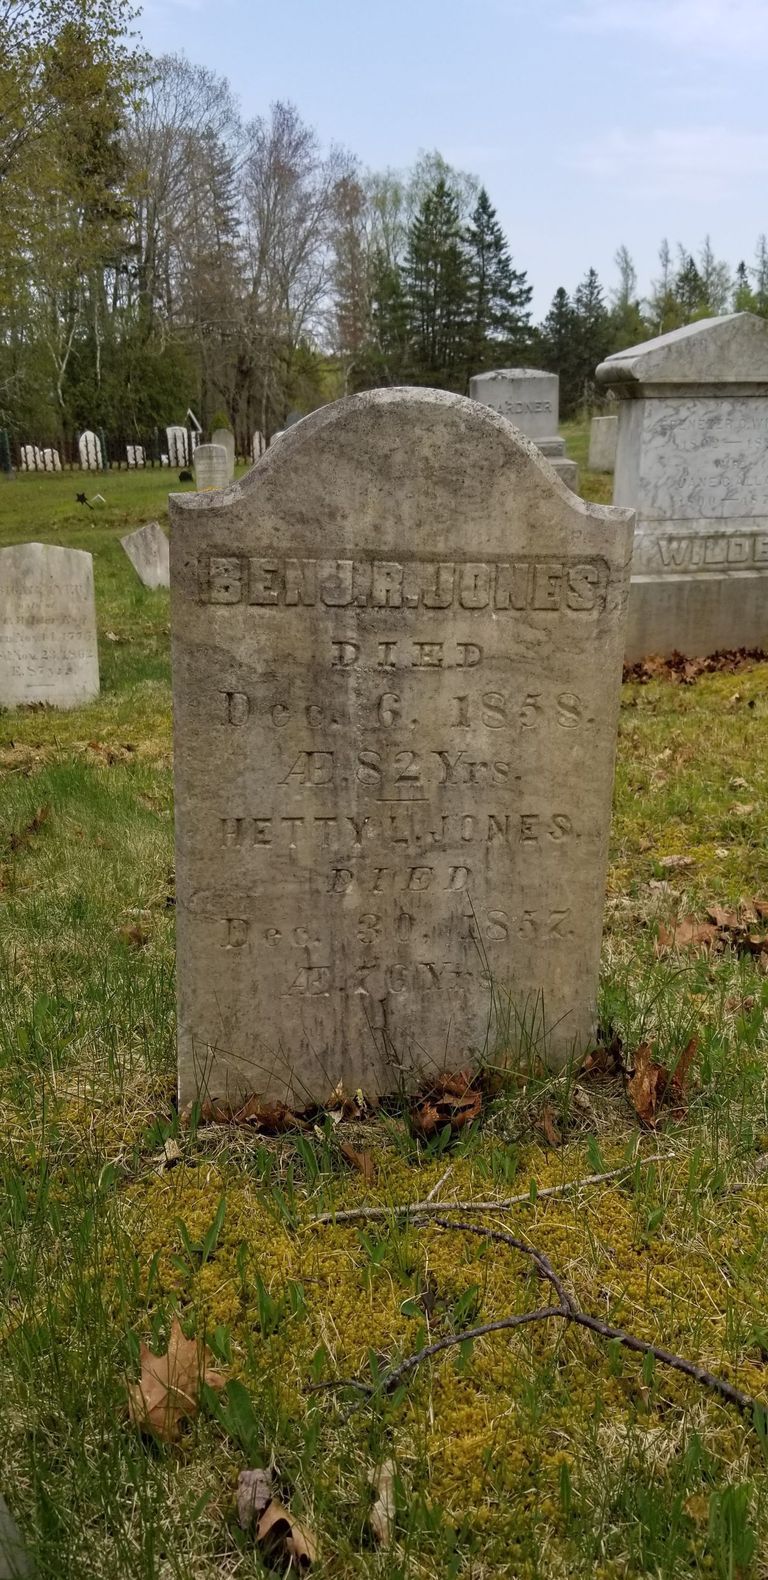          Benjamin R. and Hetty L. Jones' gravestone in the Dennysville Town Cemetery.; This gravestone records the deaths of Benjamin R. Jones, a noted surveyor, in 1858 and his wife Hetty in 1857, in the Dennysville Town Cemetery.
   